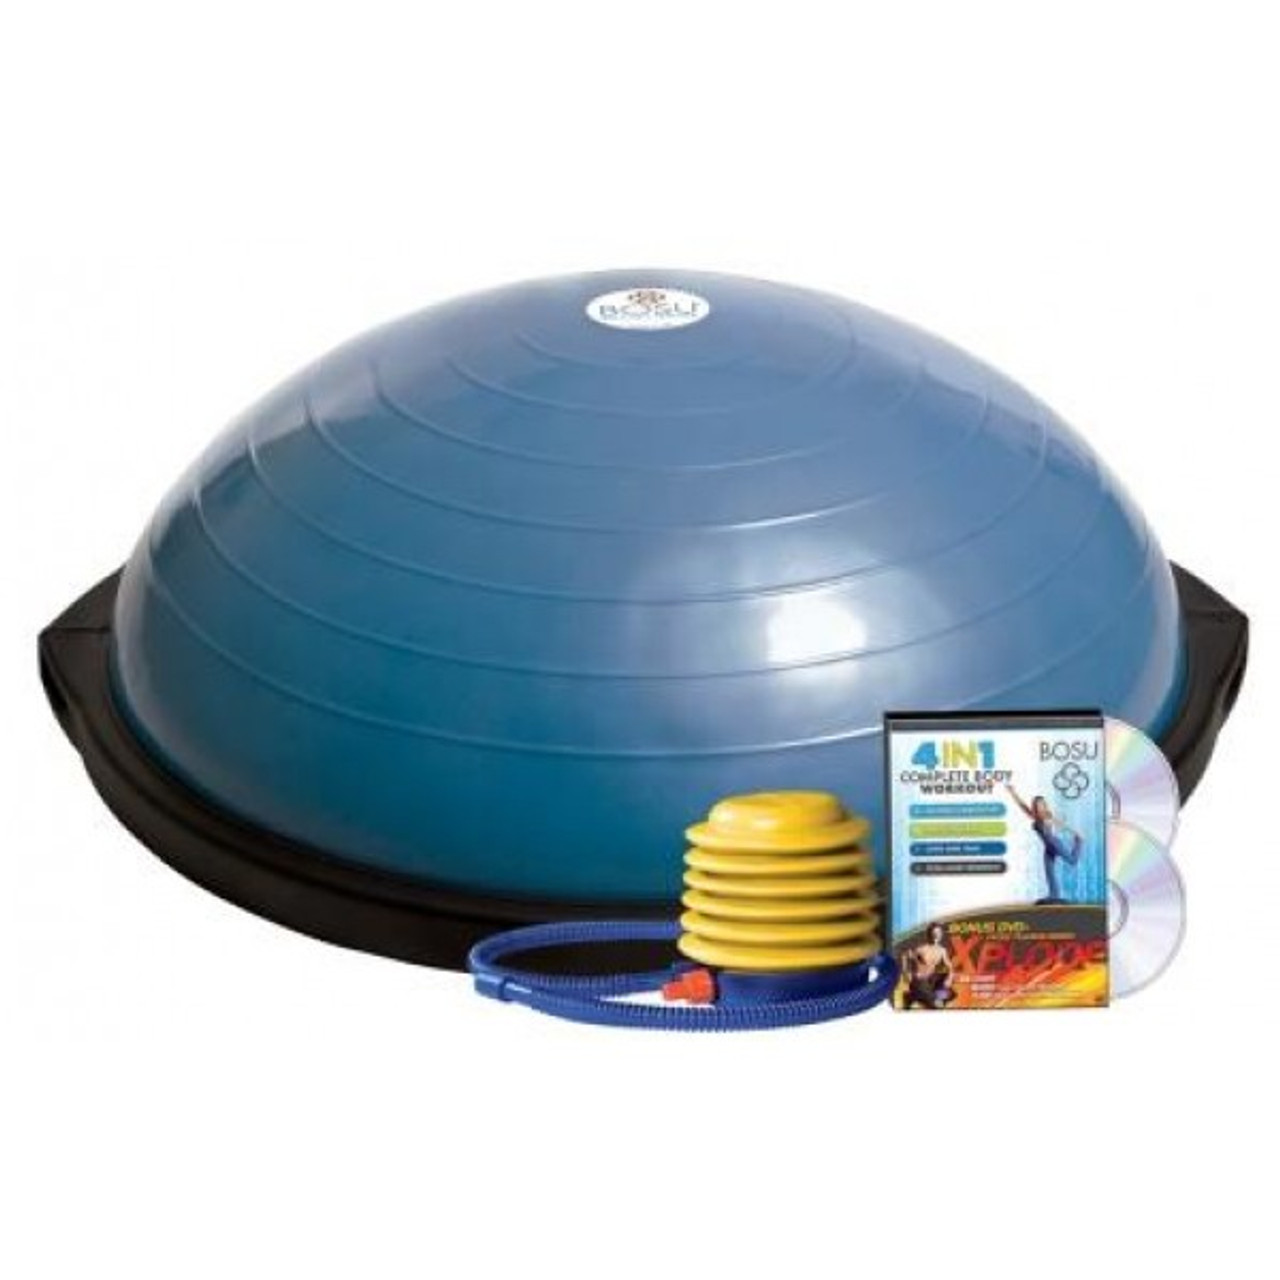 BOSU Total Training System with 4-in-1 DVD & 2 Xplode DVDs